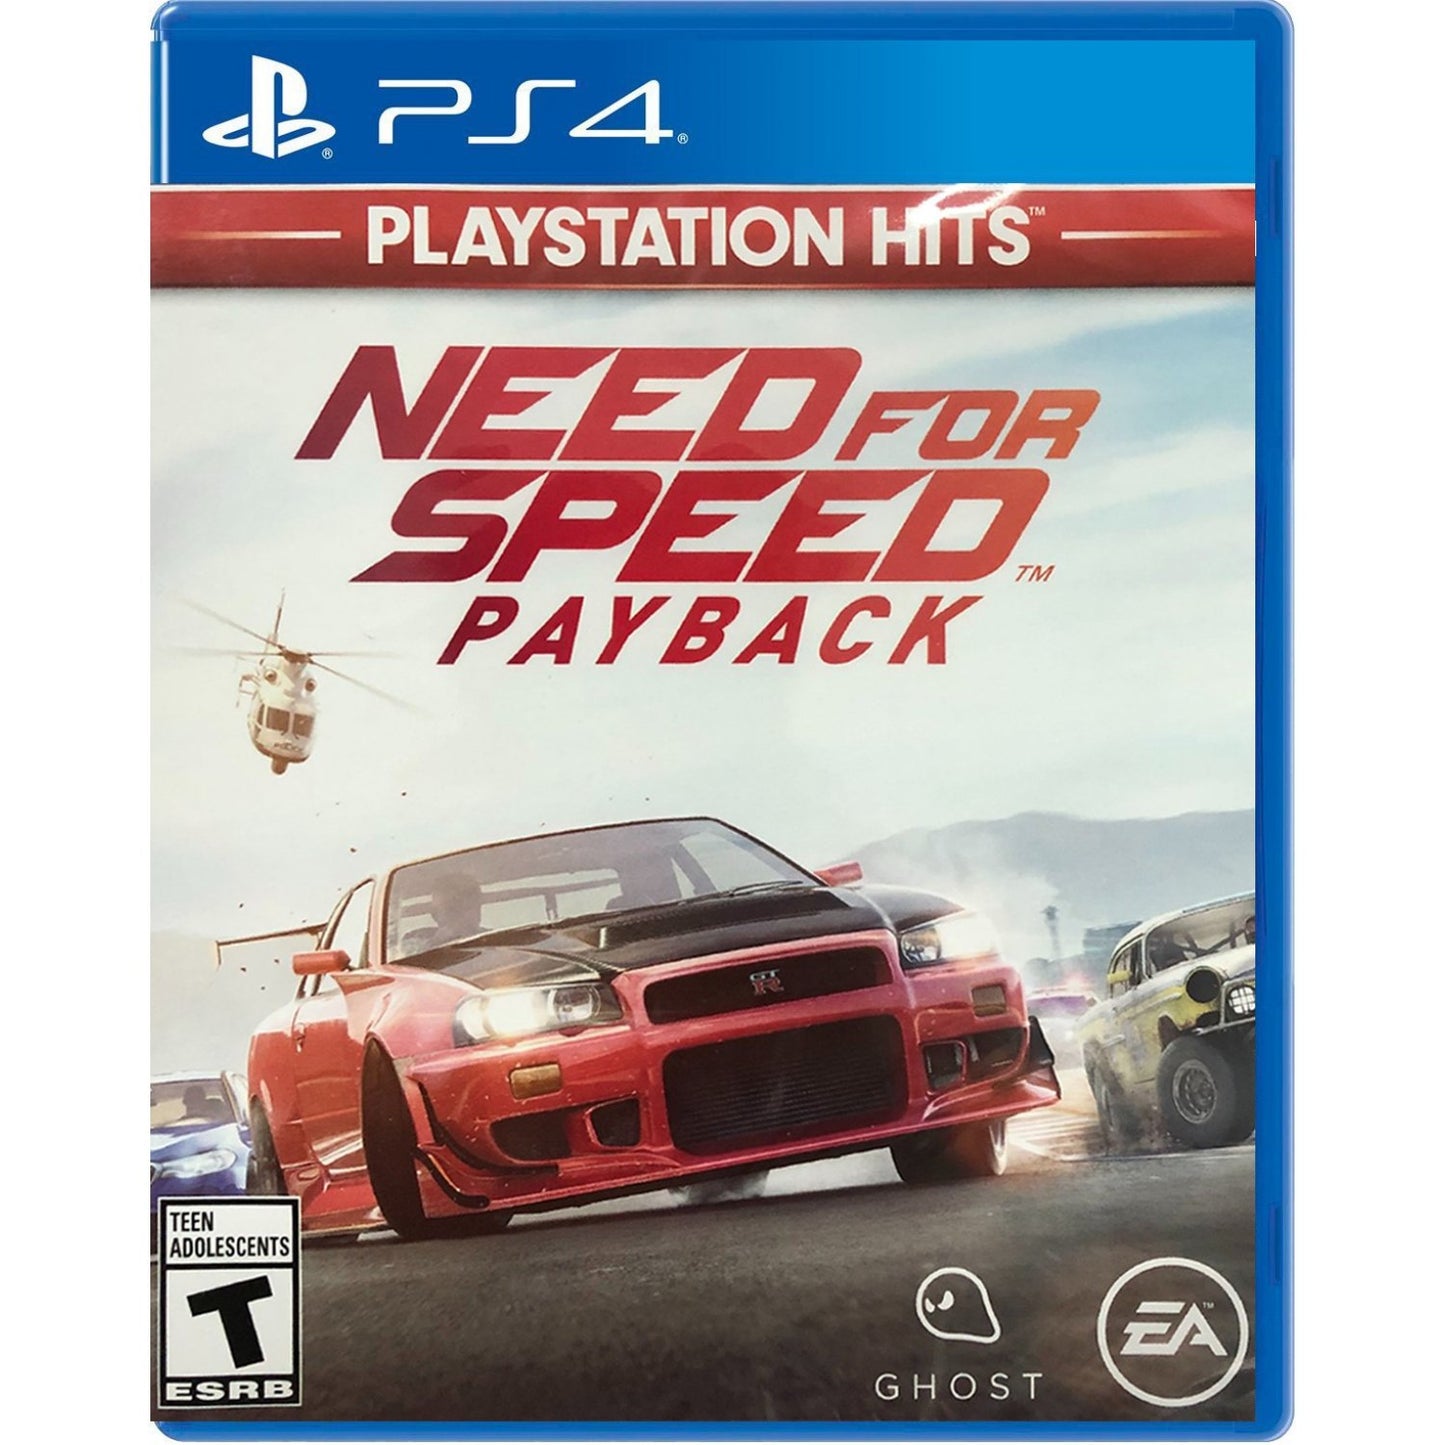 PS4 NEED FOR SPEED PAYBACK - NUEVO